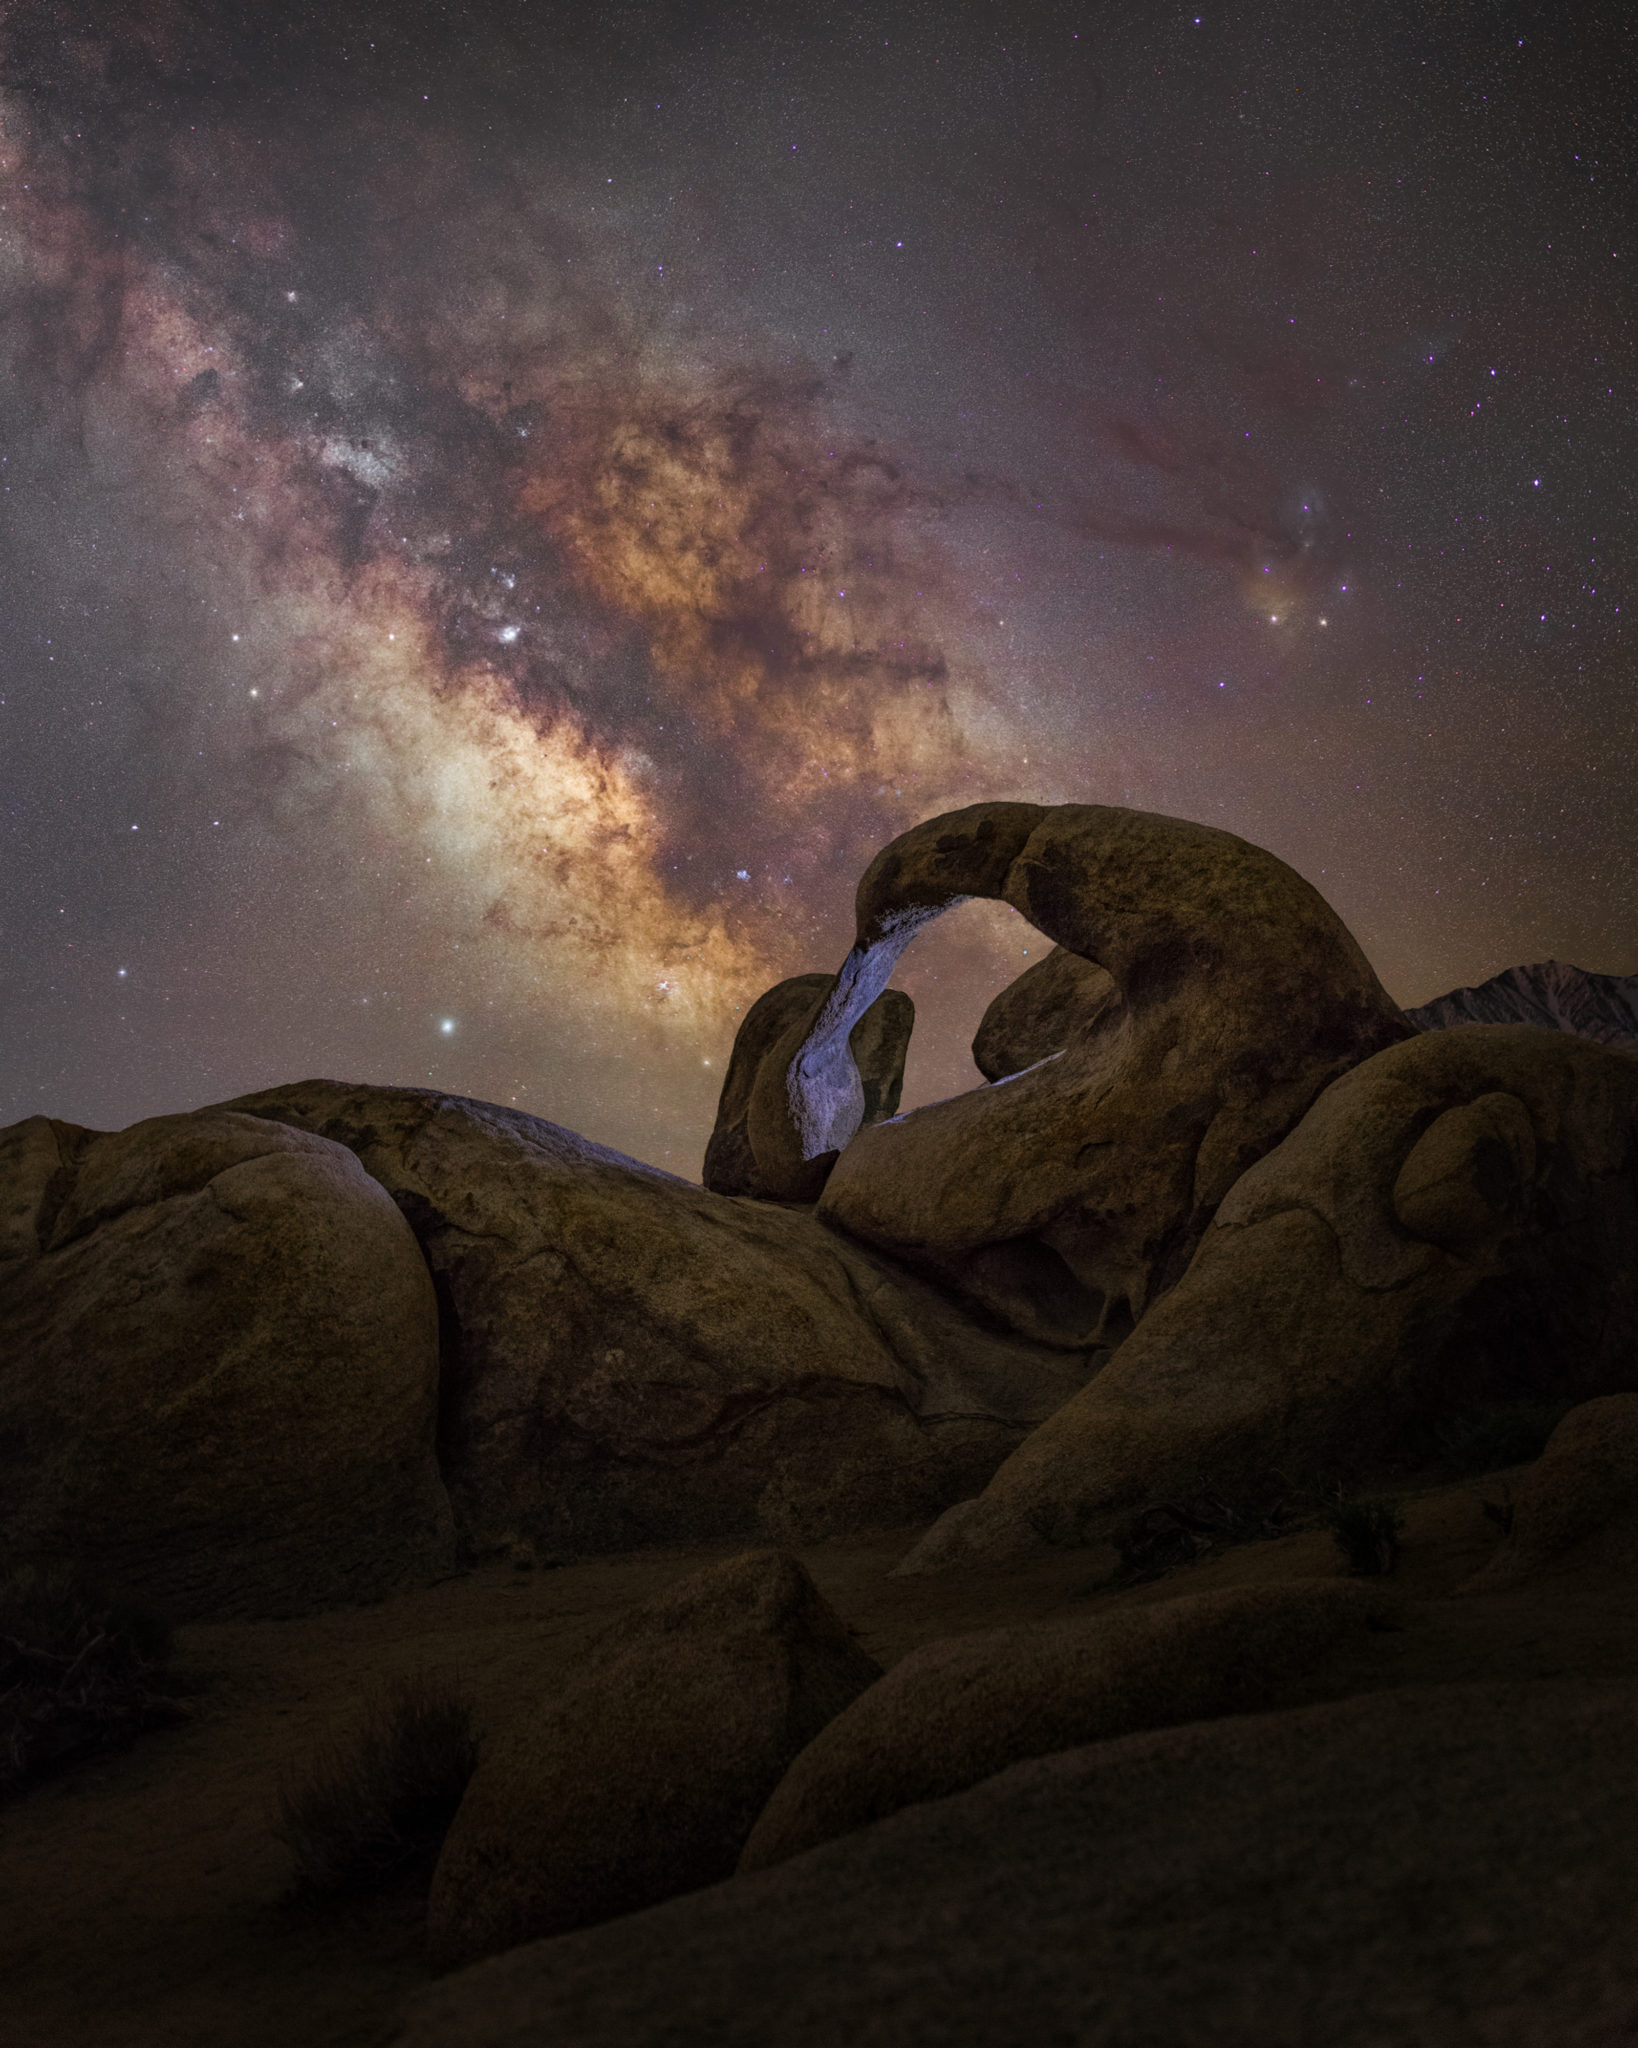 How Photographer Steven Magner Uses a Lens Filter to Get a Special Effect in the Night Sky